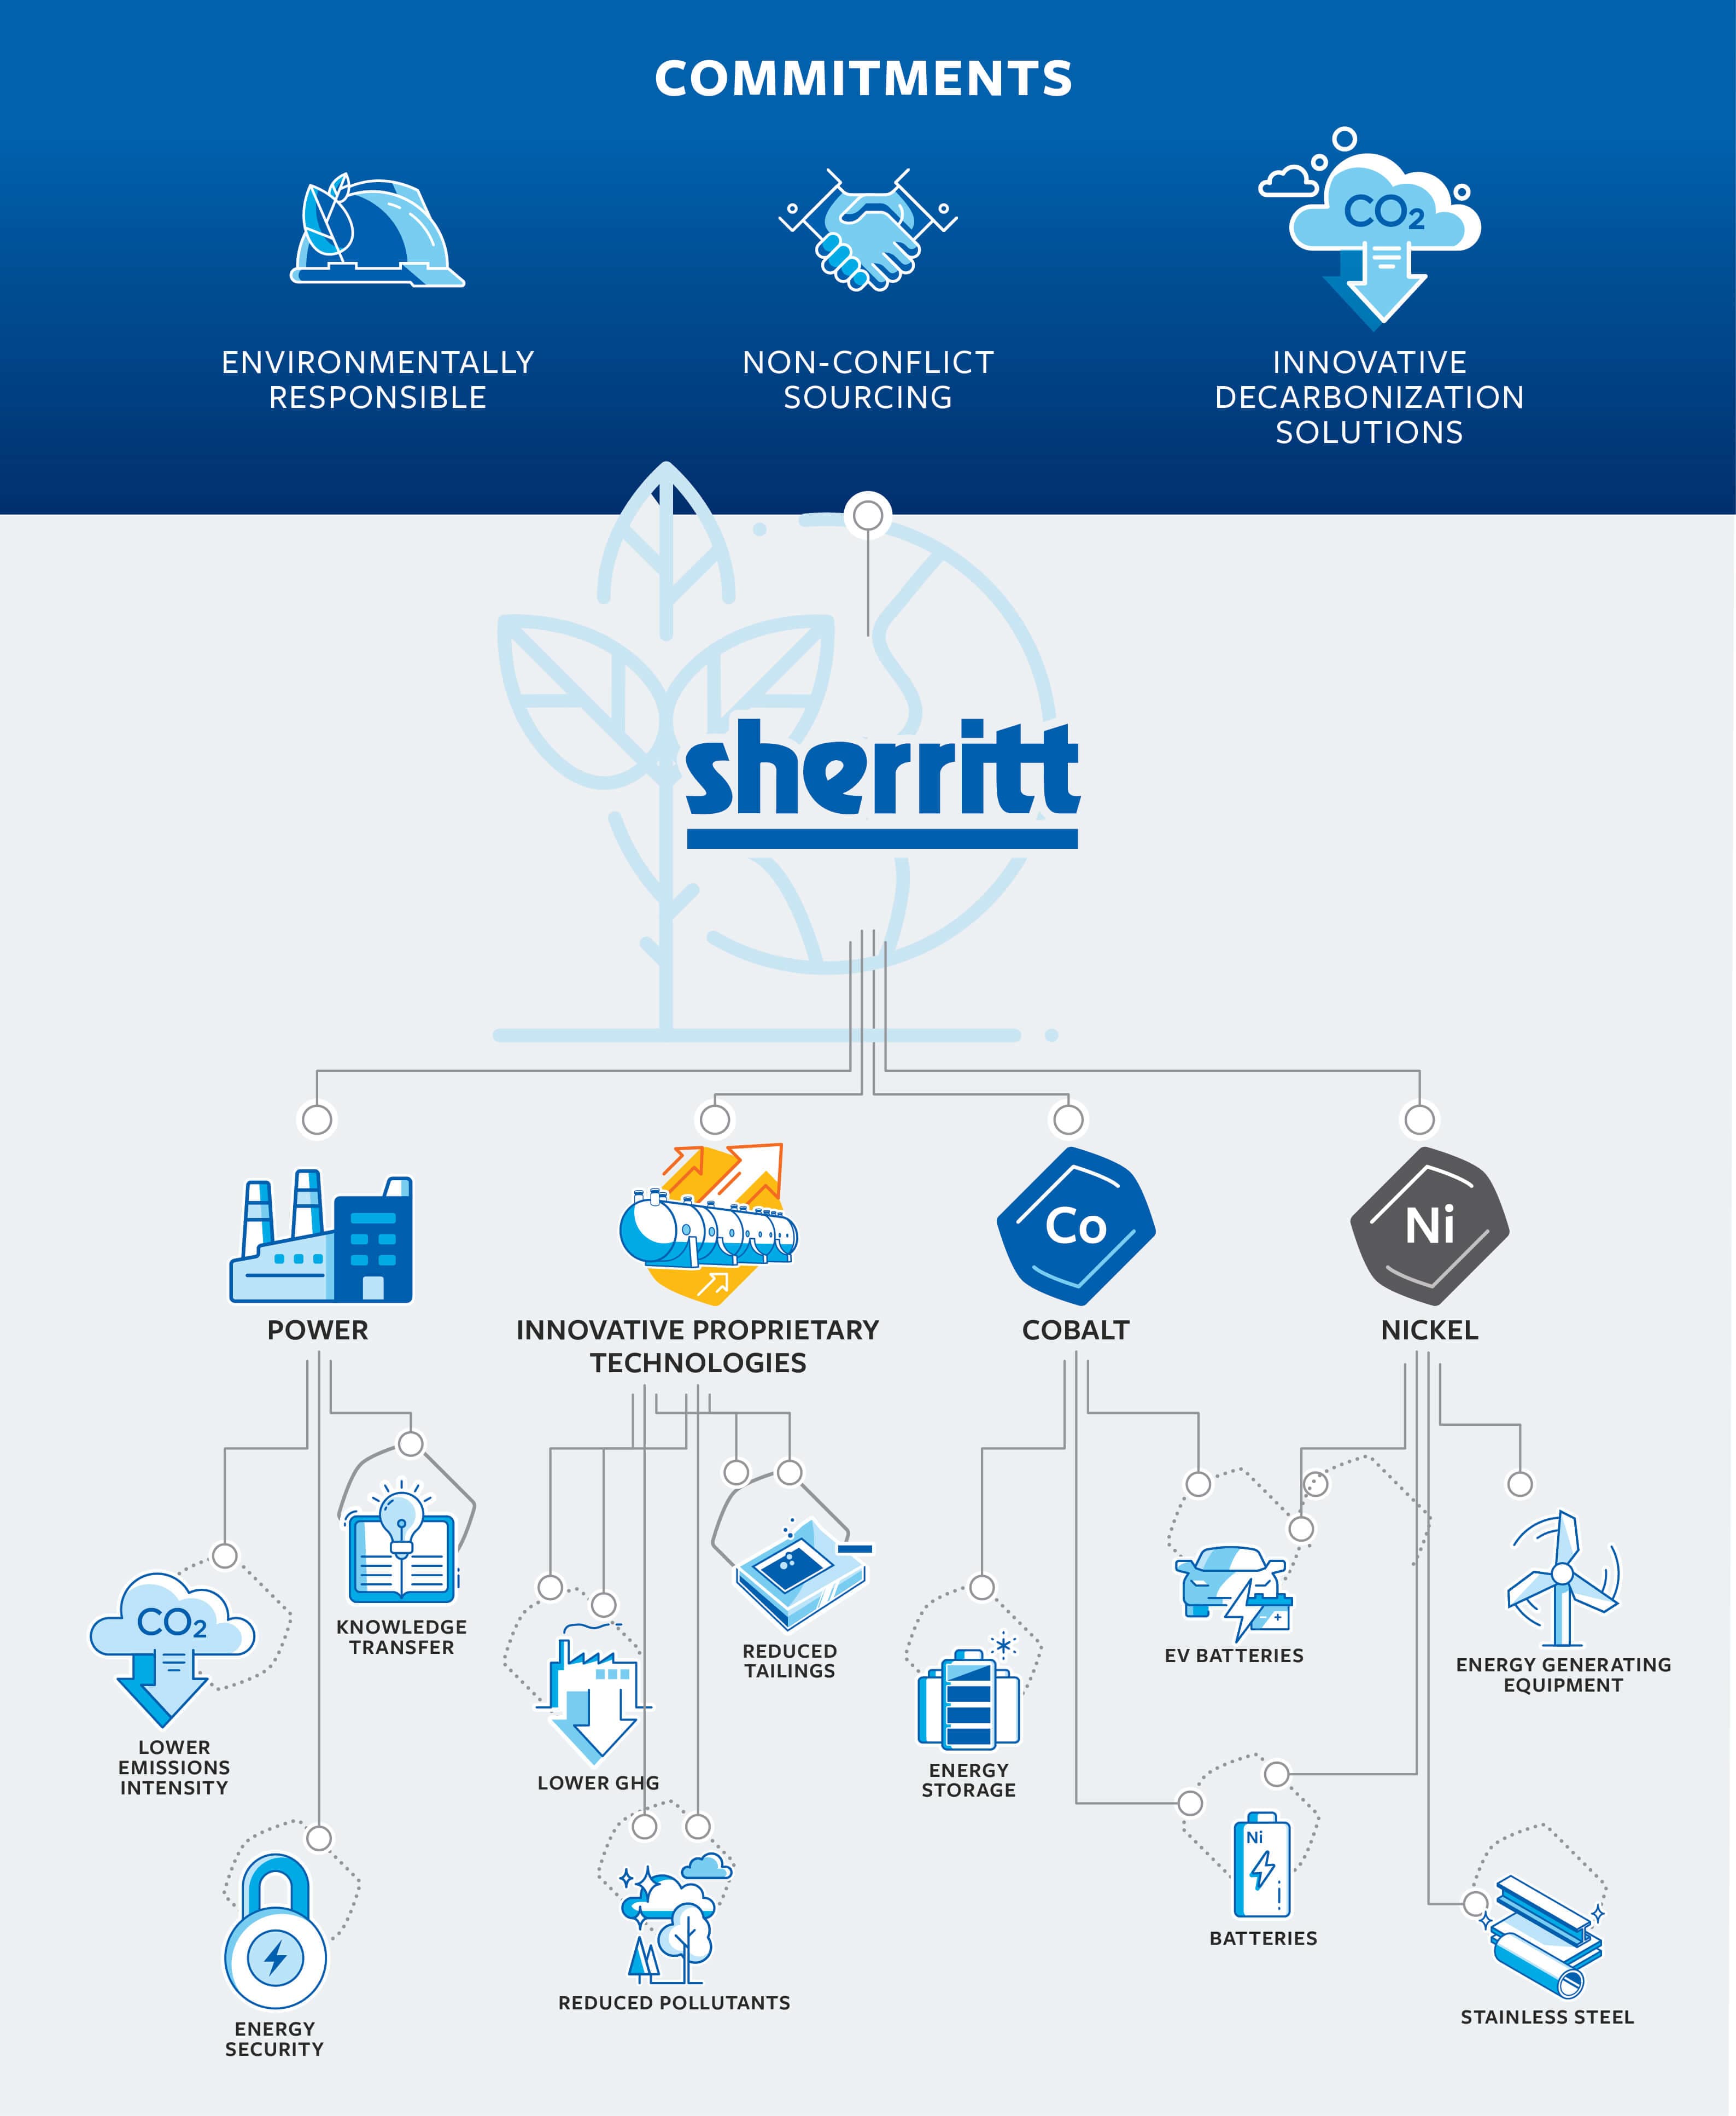 A graphic illustrating an outline of Sherritt’s stated commitments as they relate to being environmentally responsible, seeking out non-conflict sourcing and finding innovative decarbonization solutions